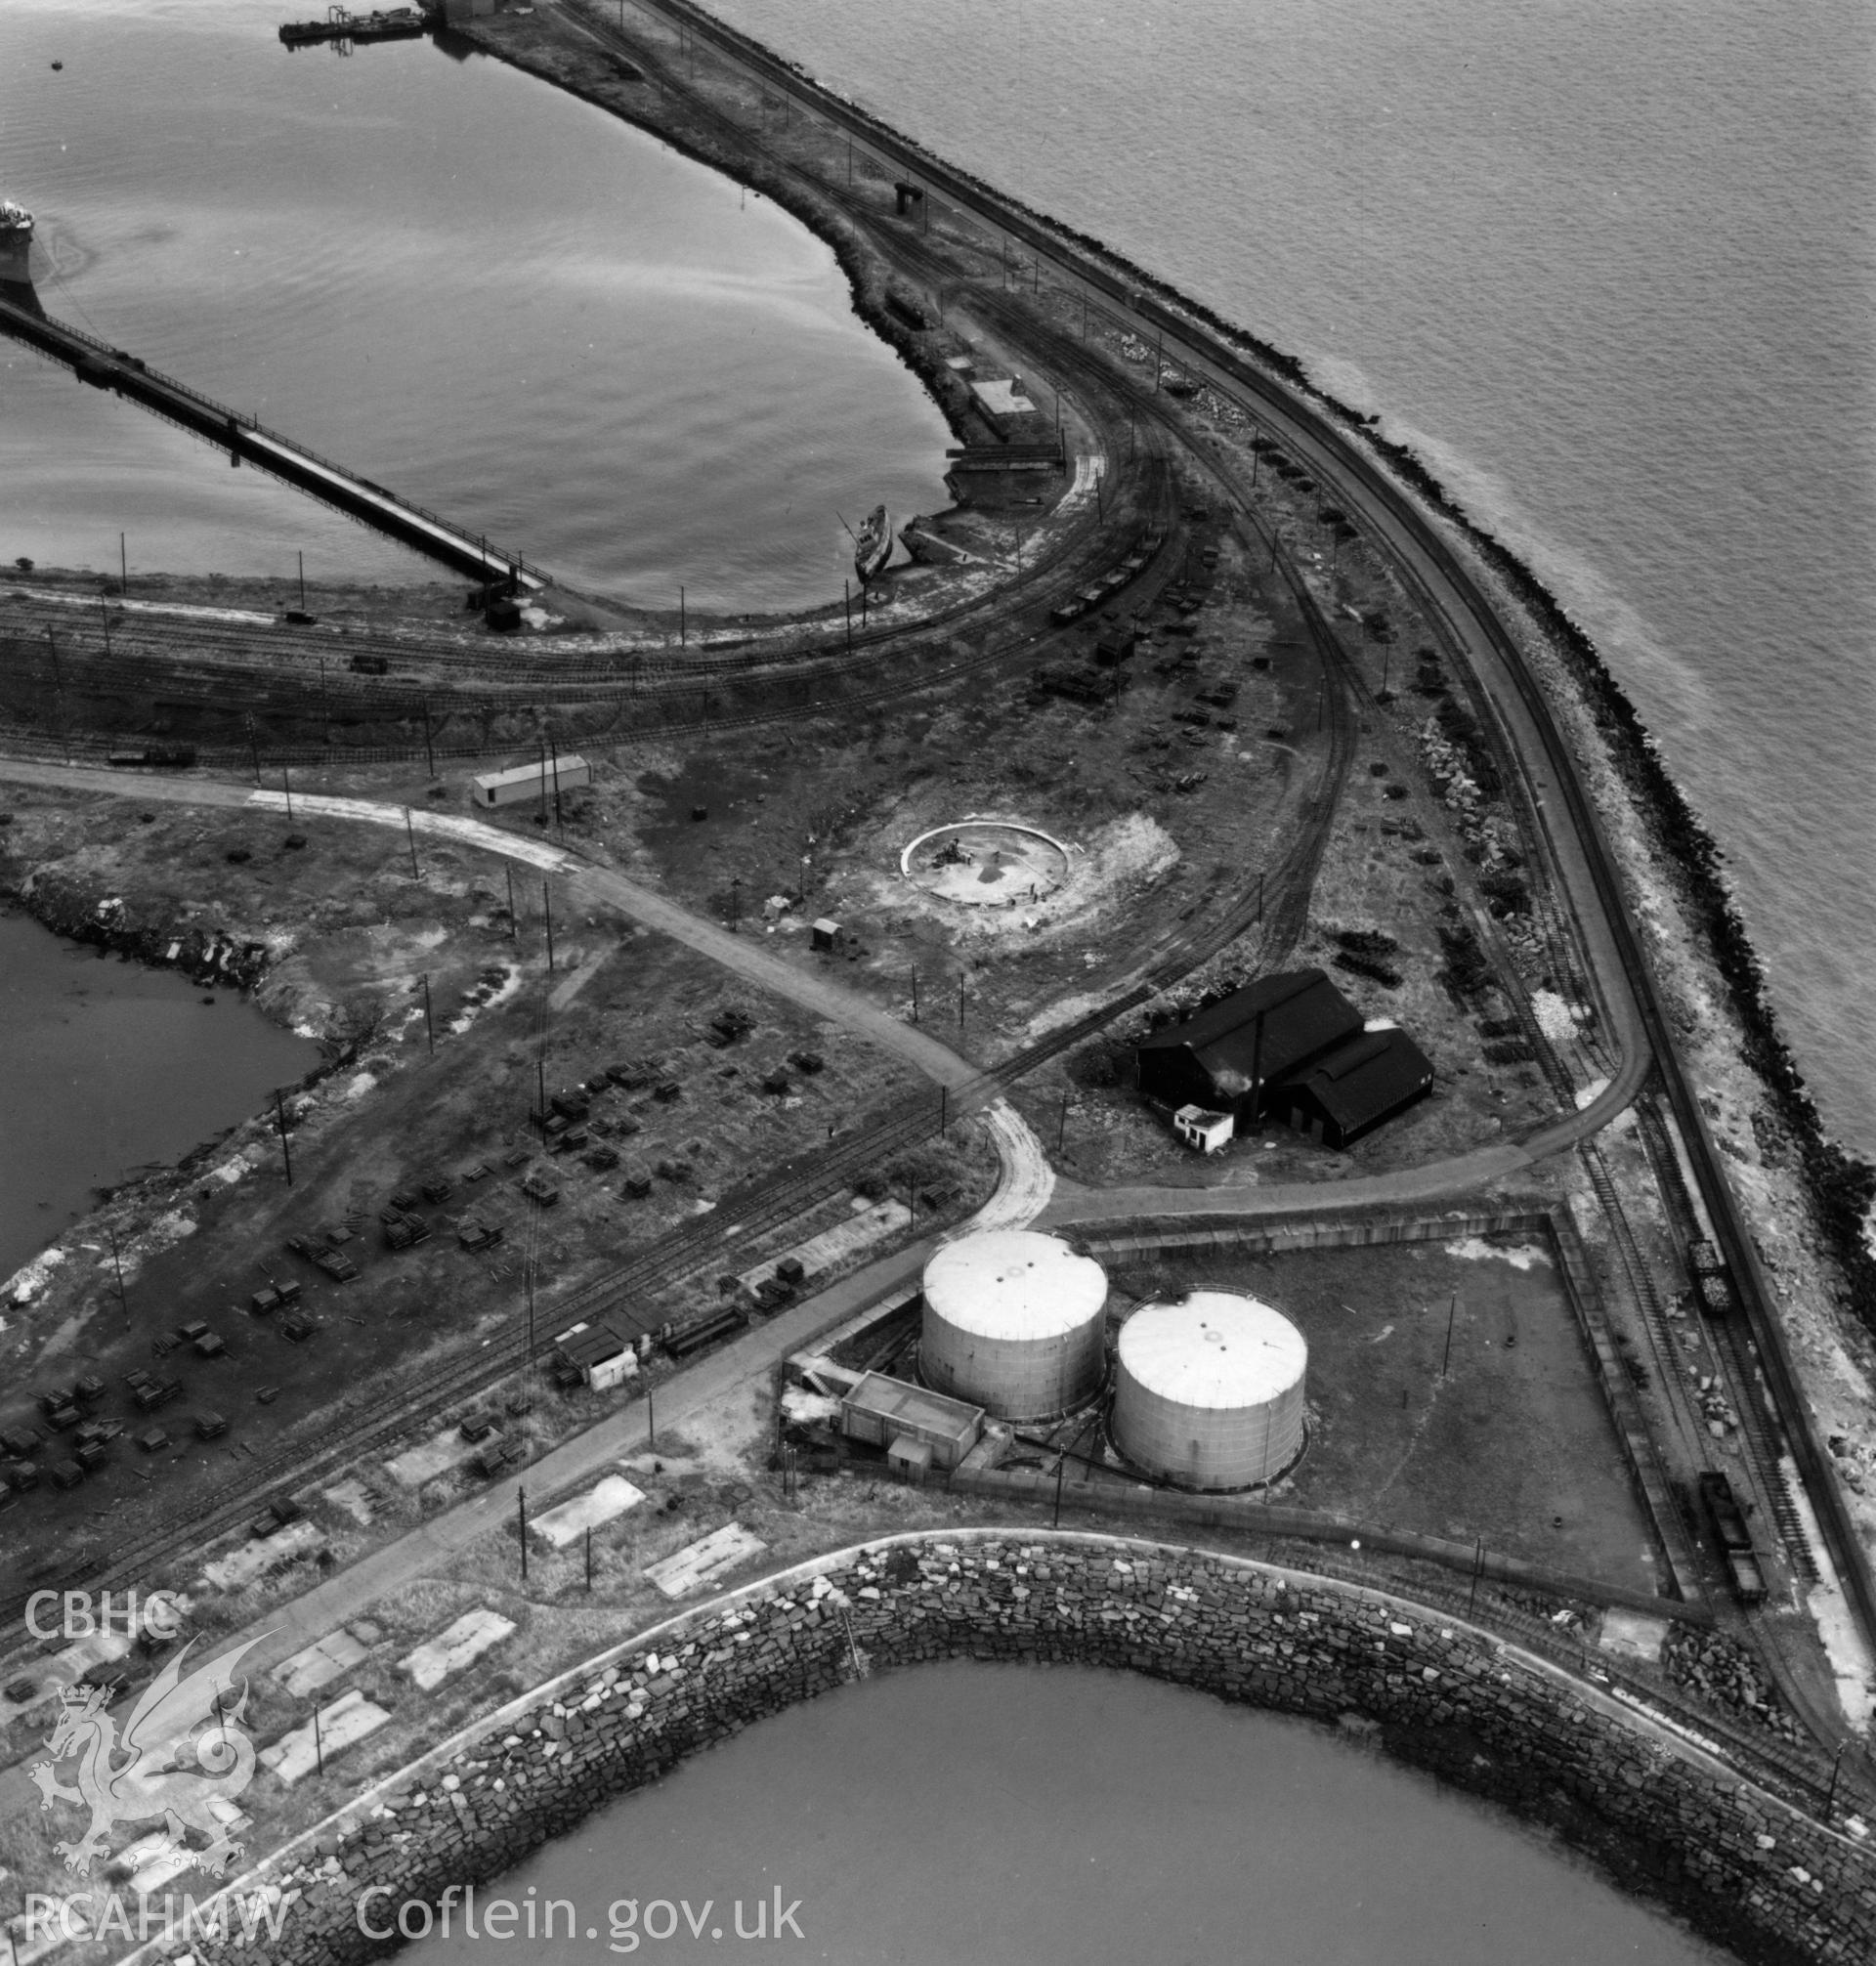 View of oil tanks at Queen's Dock, Swansea from National Oil Refinery, Llandarcy. Oblique aerial photograph, 5?" cut roll film.